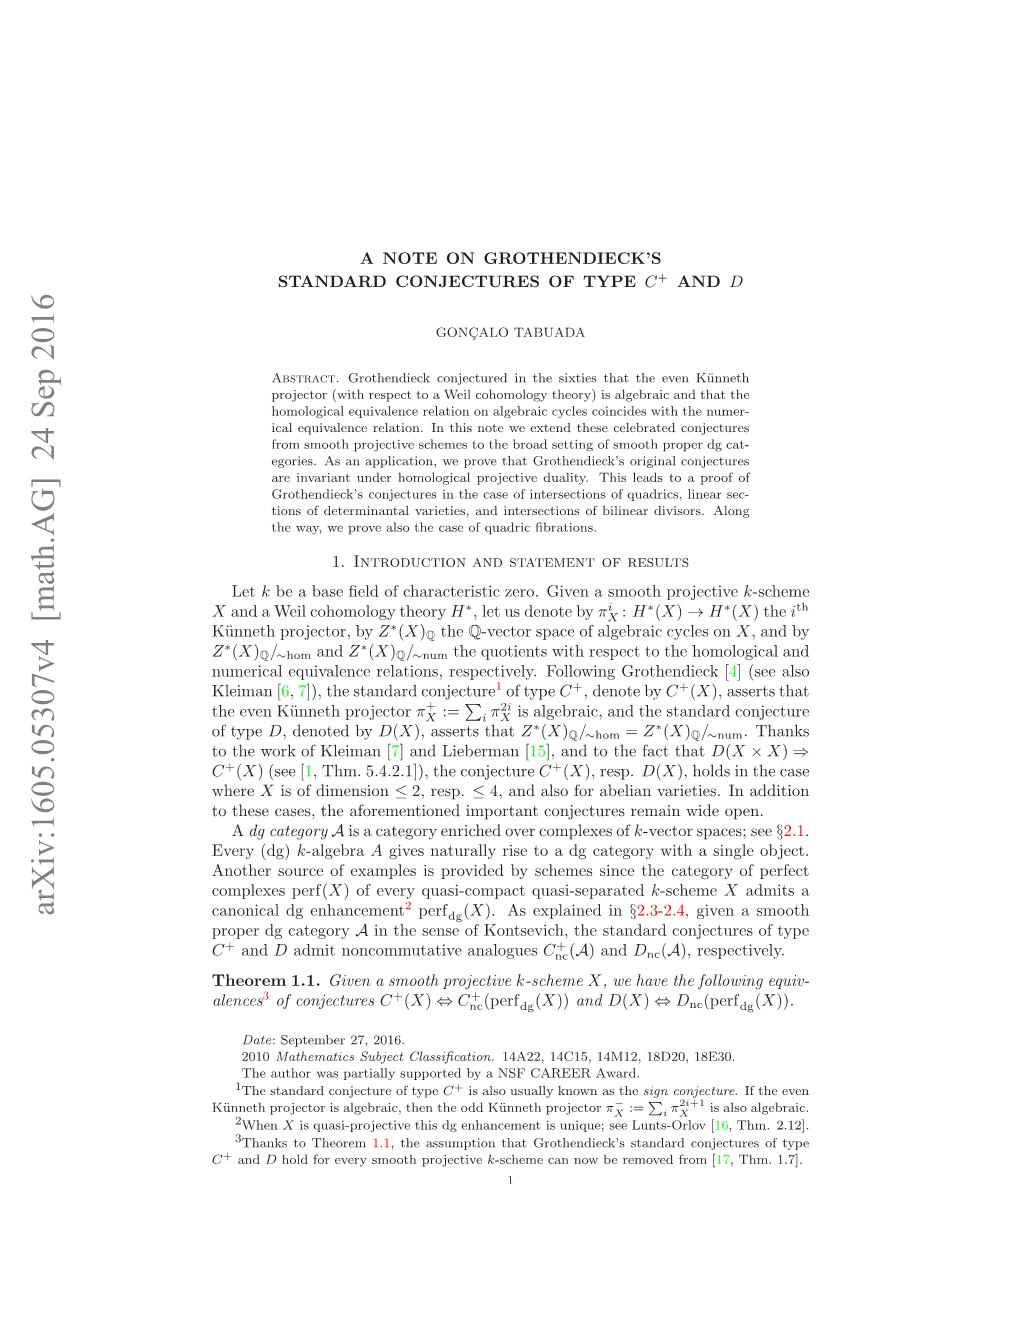 A Note on Grothendieck's Standard Conjectures of Type C and D